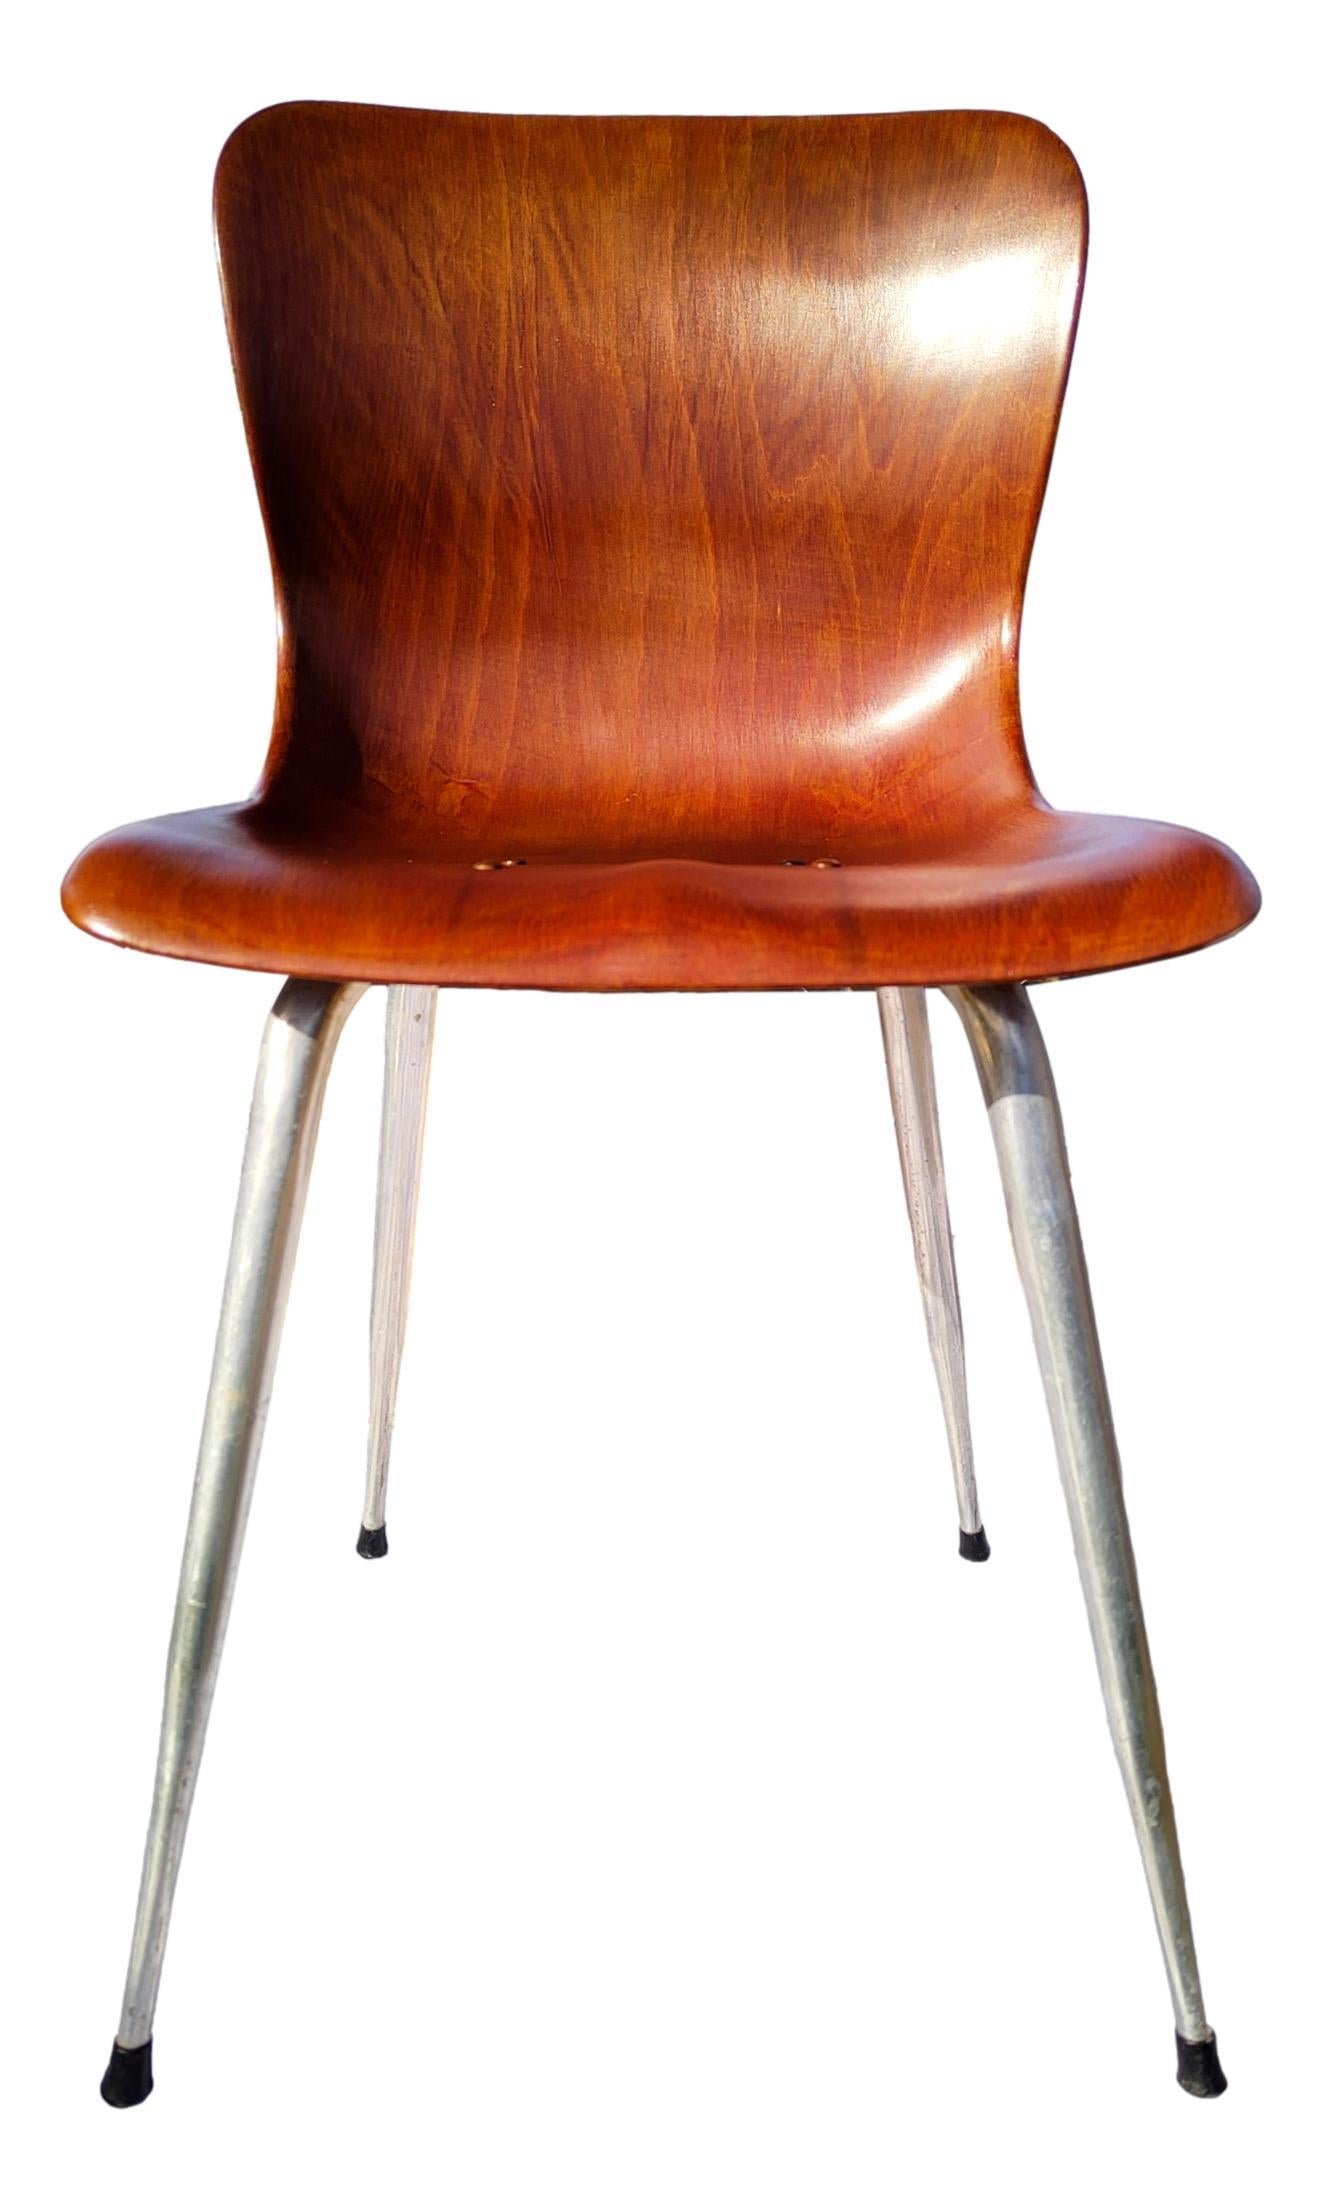 Chair 15074/II Design Elmar Flototto for Pagholz, 1960 In Good Condition For Sale In taranto, IT